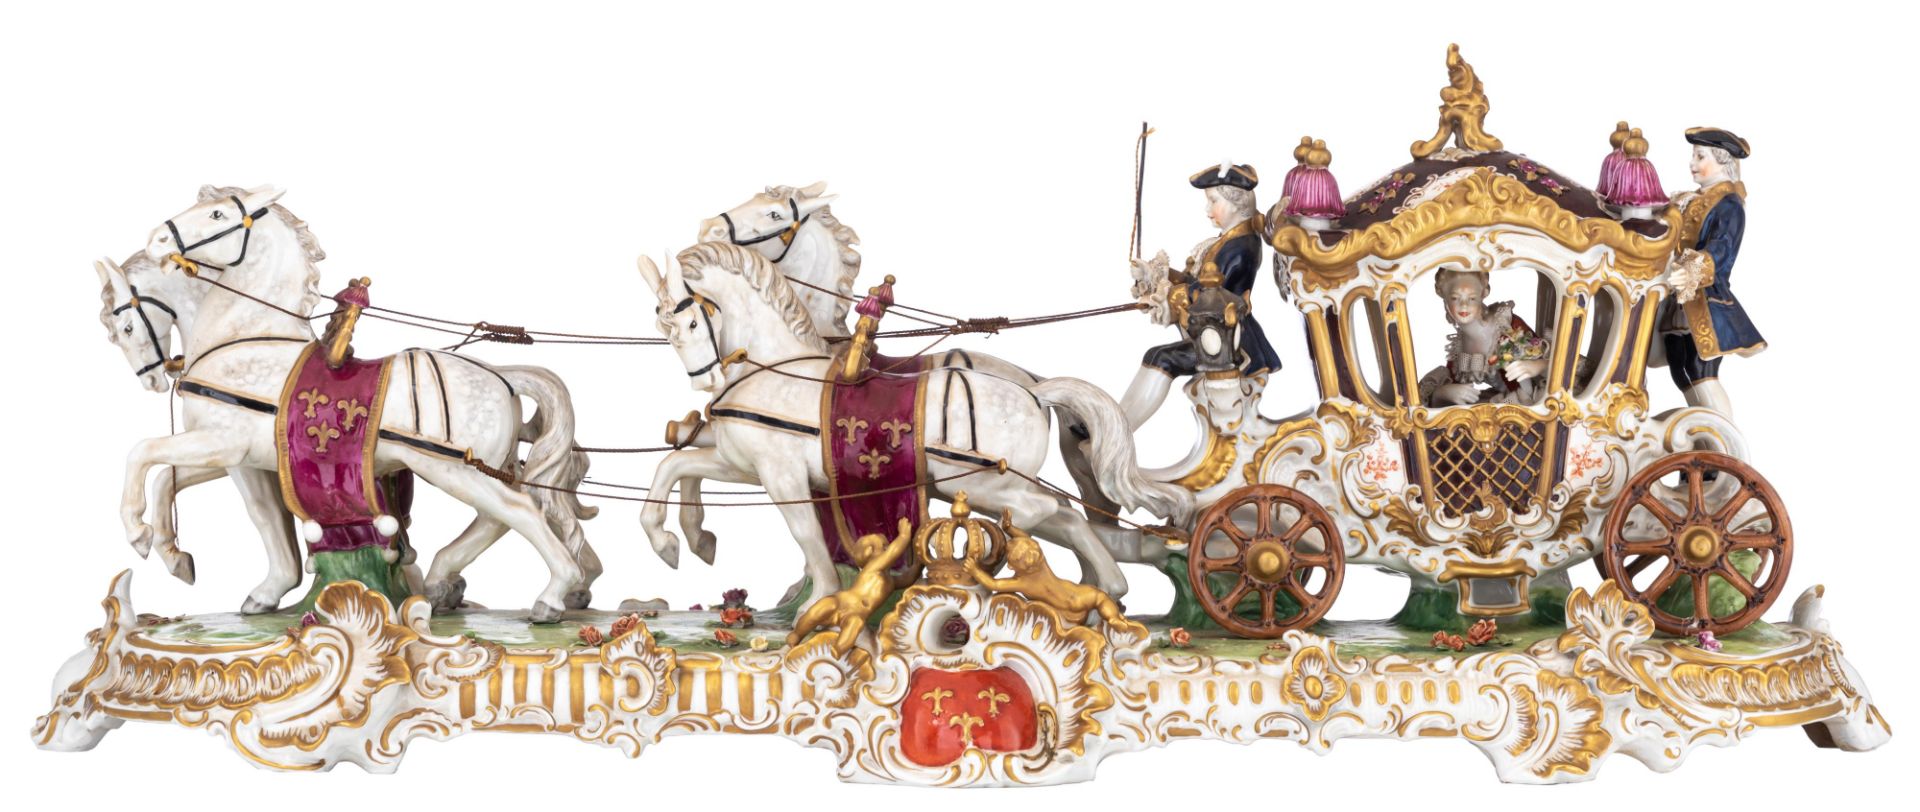 A polychrome and gilt decorated Saxony porcelain group depicting the bridal carriage, marked 'Unter